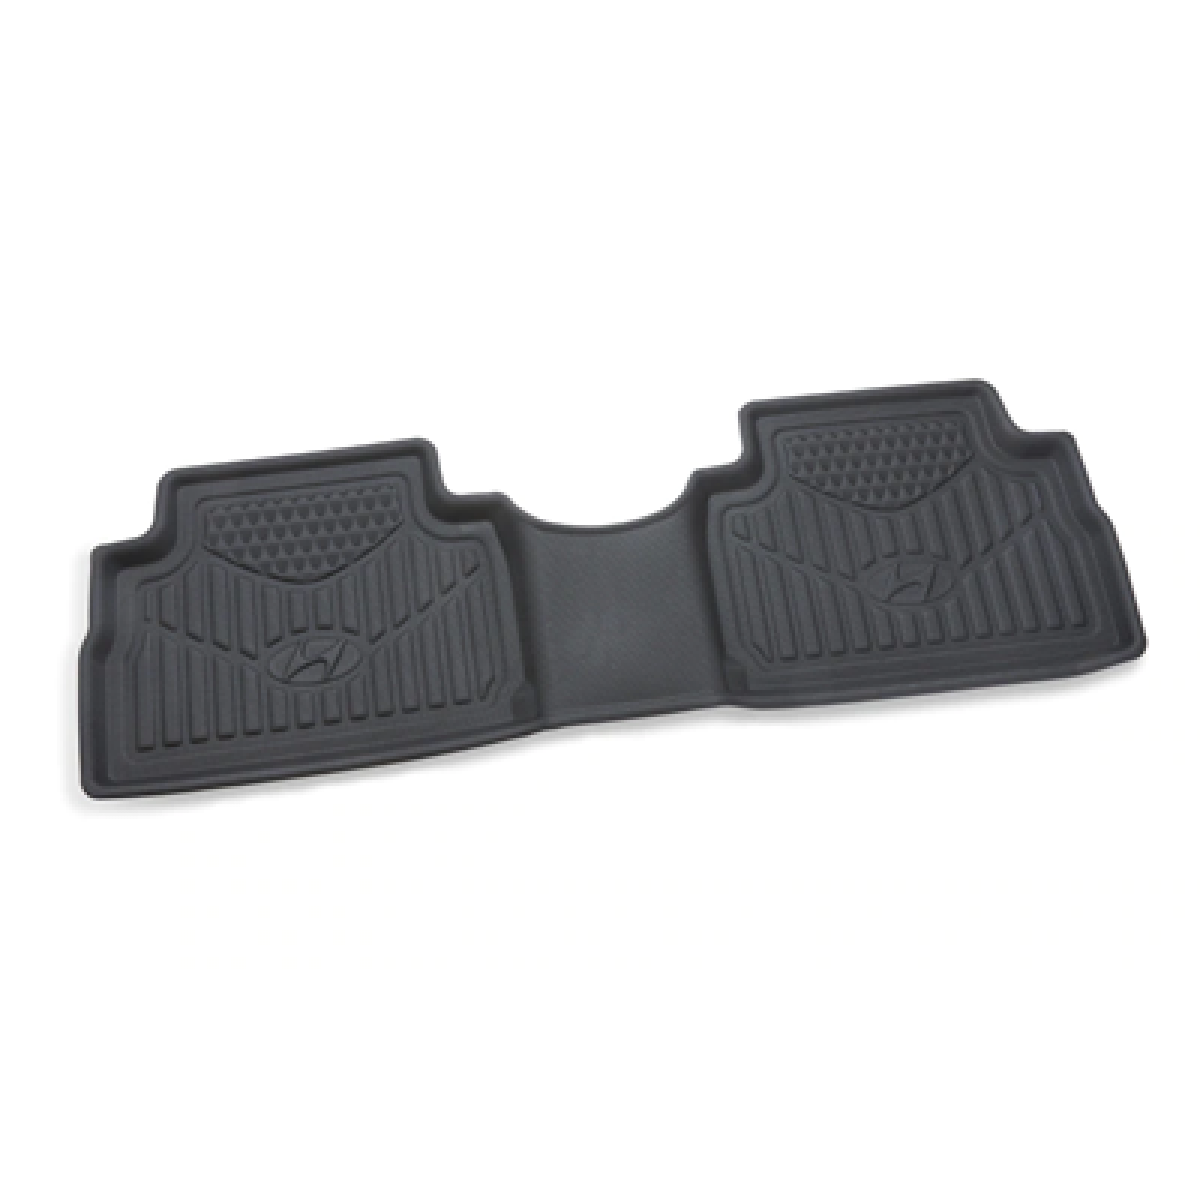 Hyundai Floor Liners - WeatherTech, All Weather, Rear S2H17-AP800